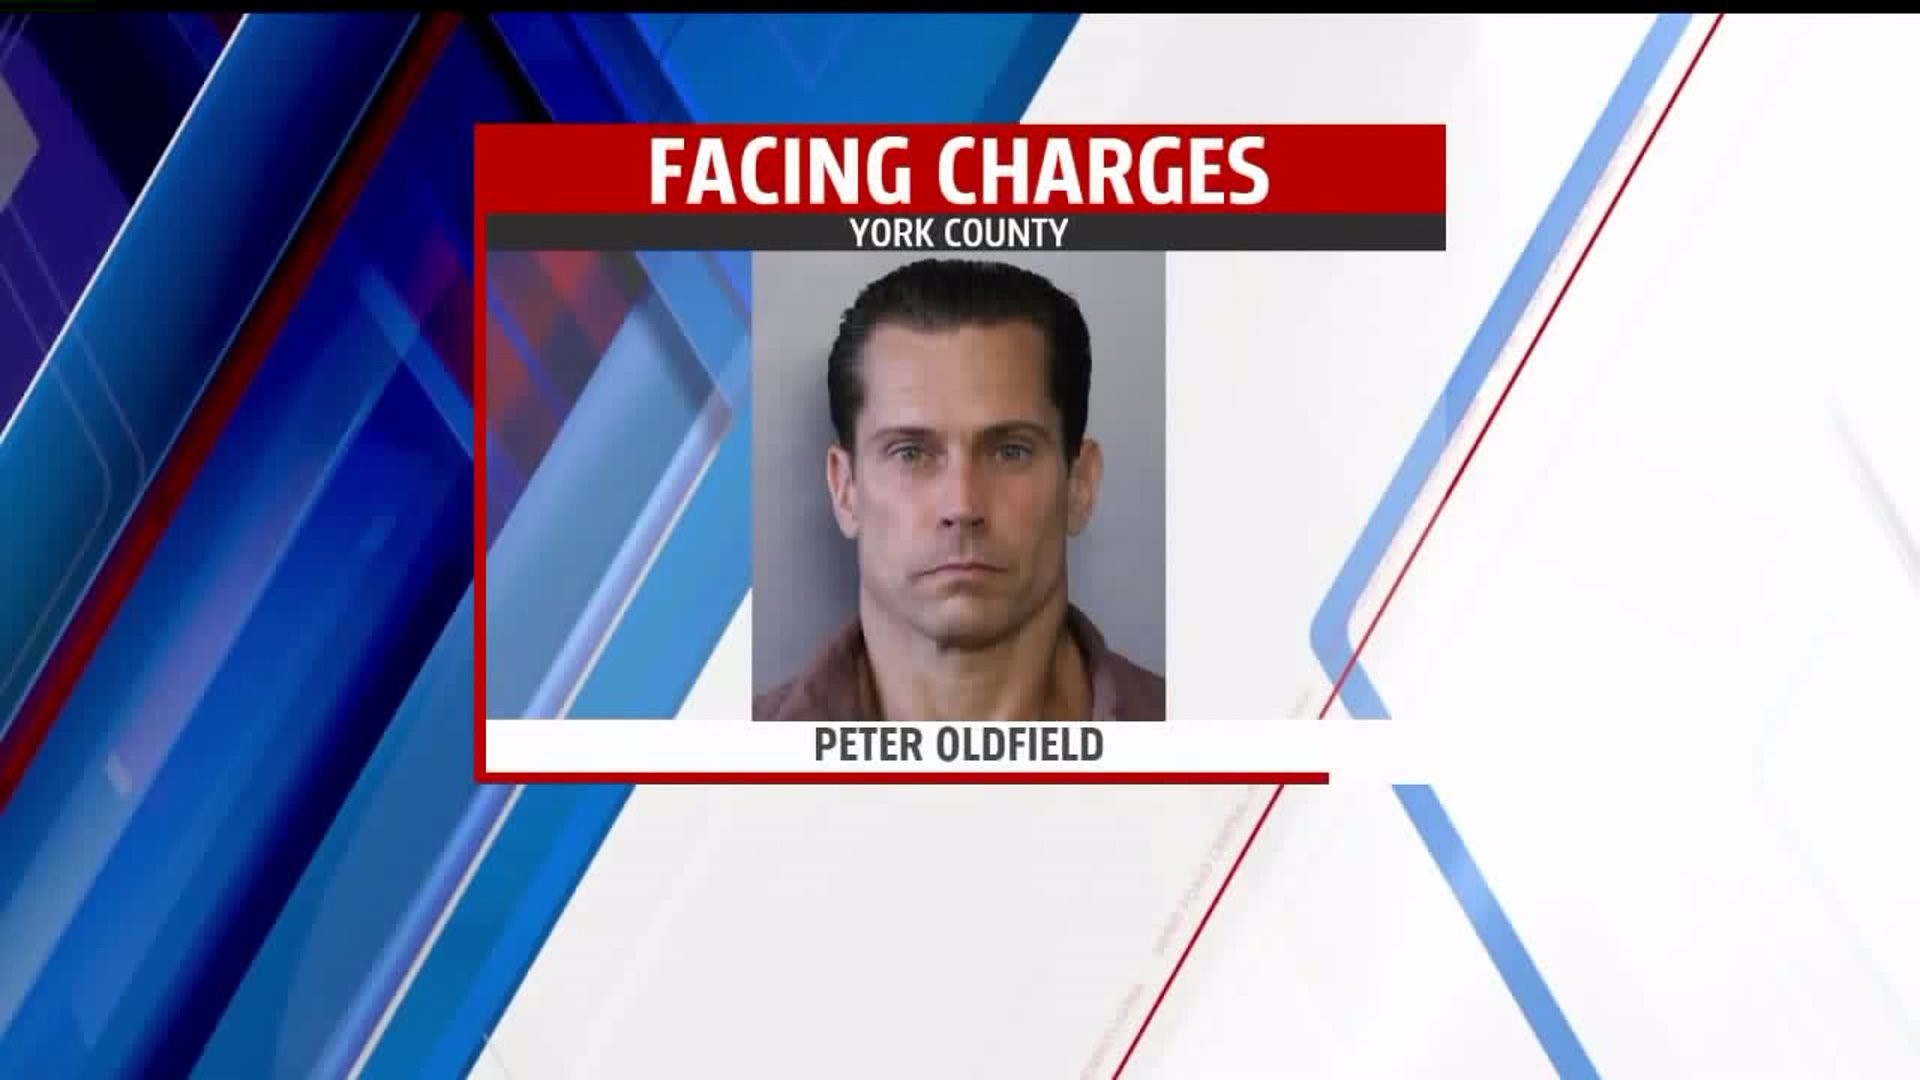 York County man facing charges for impersonating a police officer